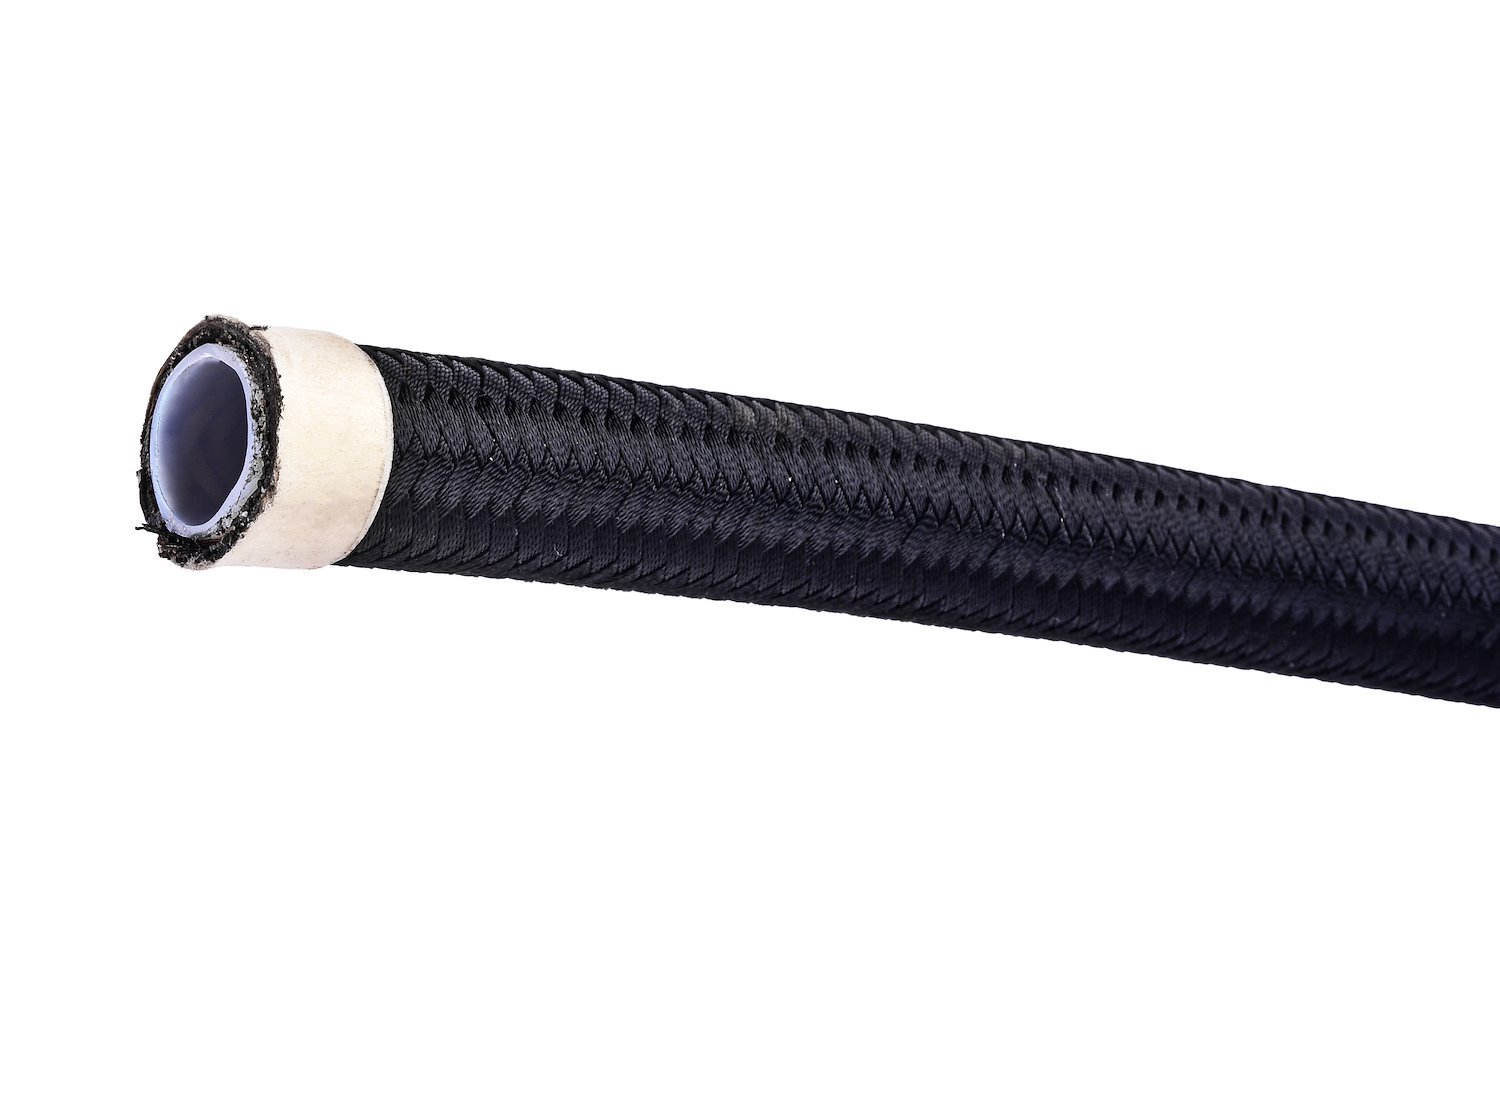 JEGS Braided Hose - PTFE-Lined Black Braided Nylon Hose -8AN, 20 ft. - JEGS